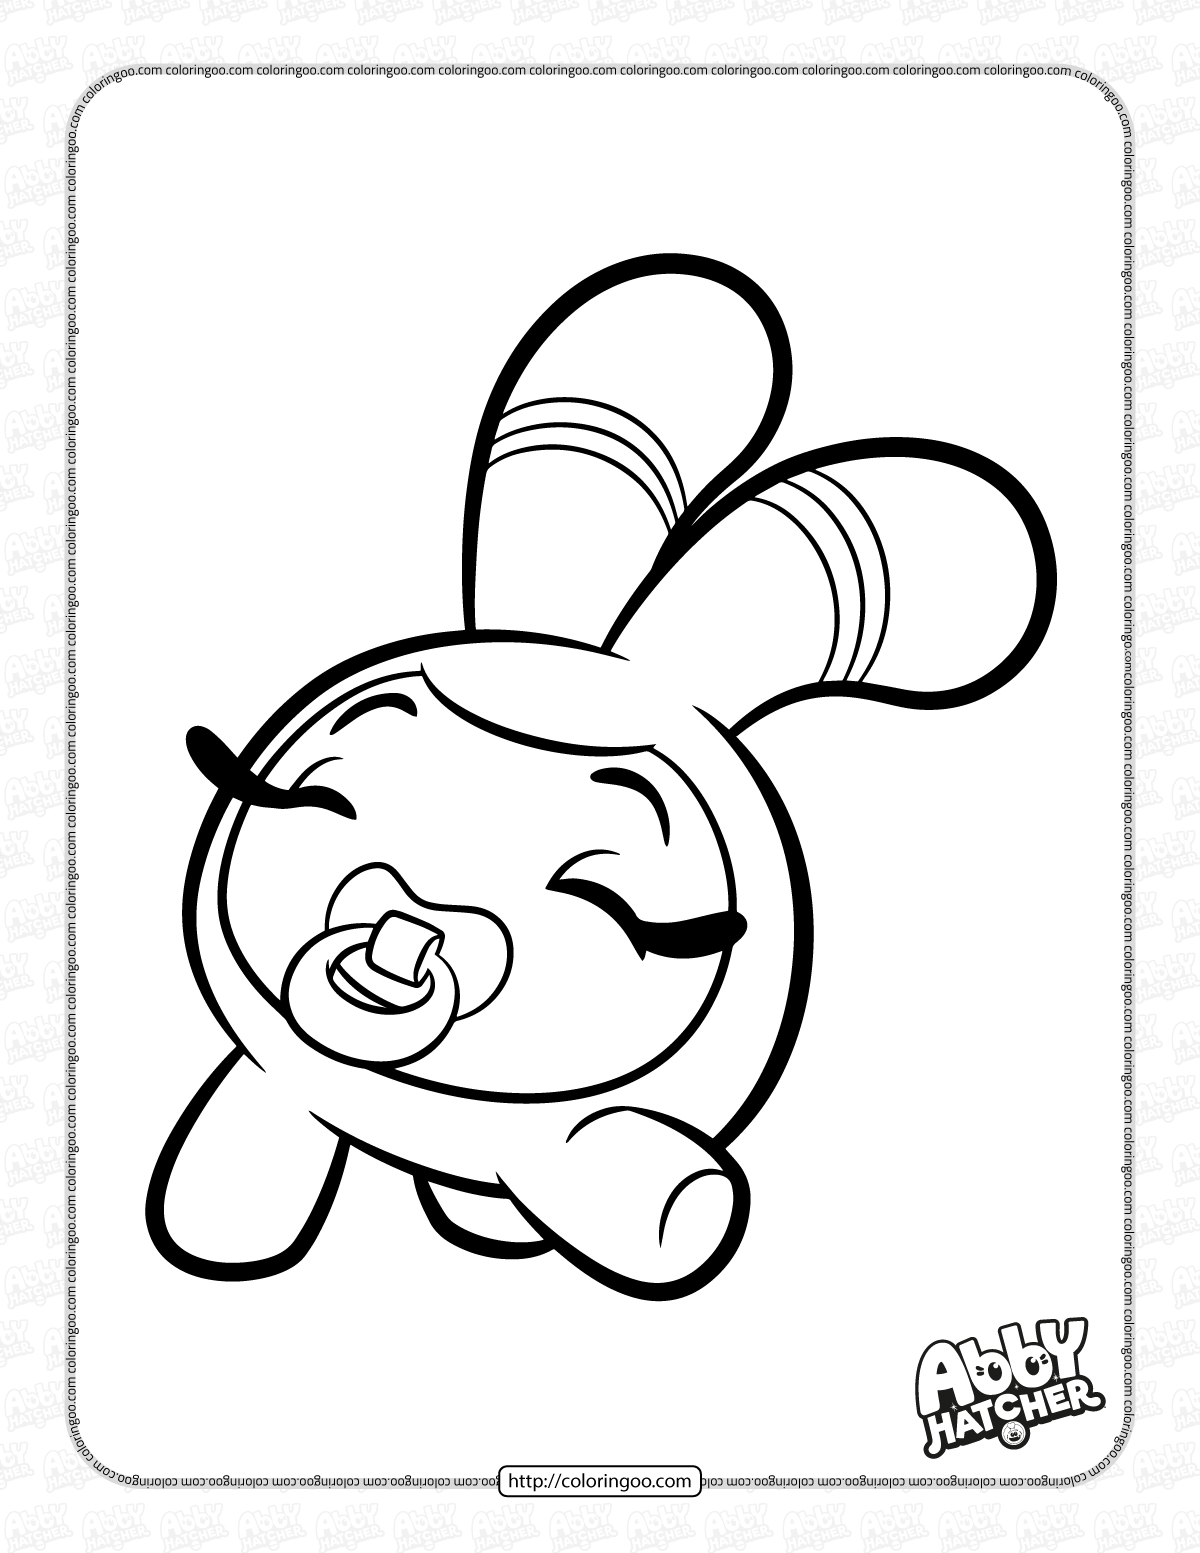 little squeaky peepers coloring pages